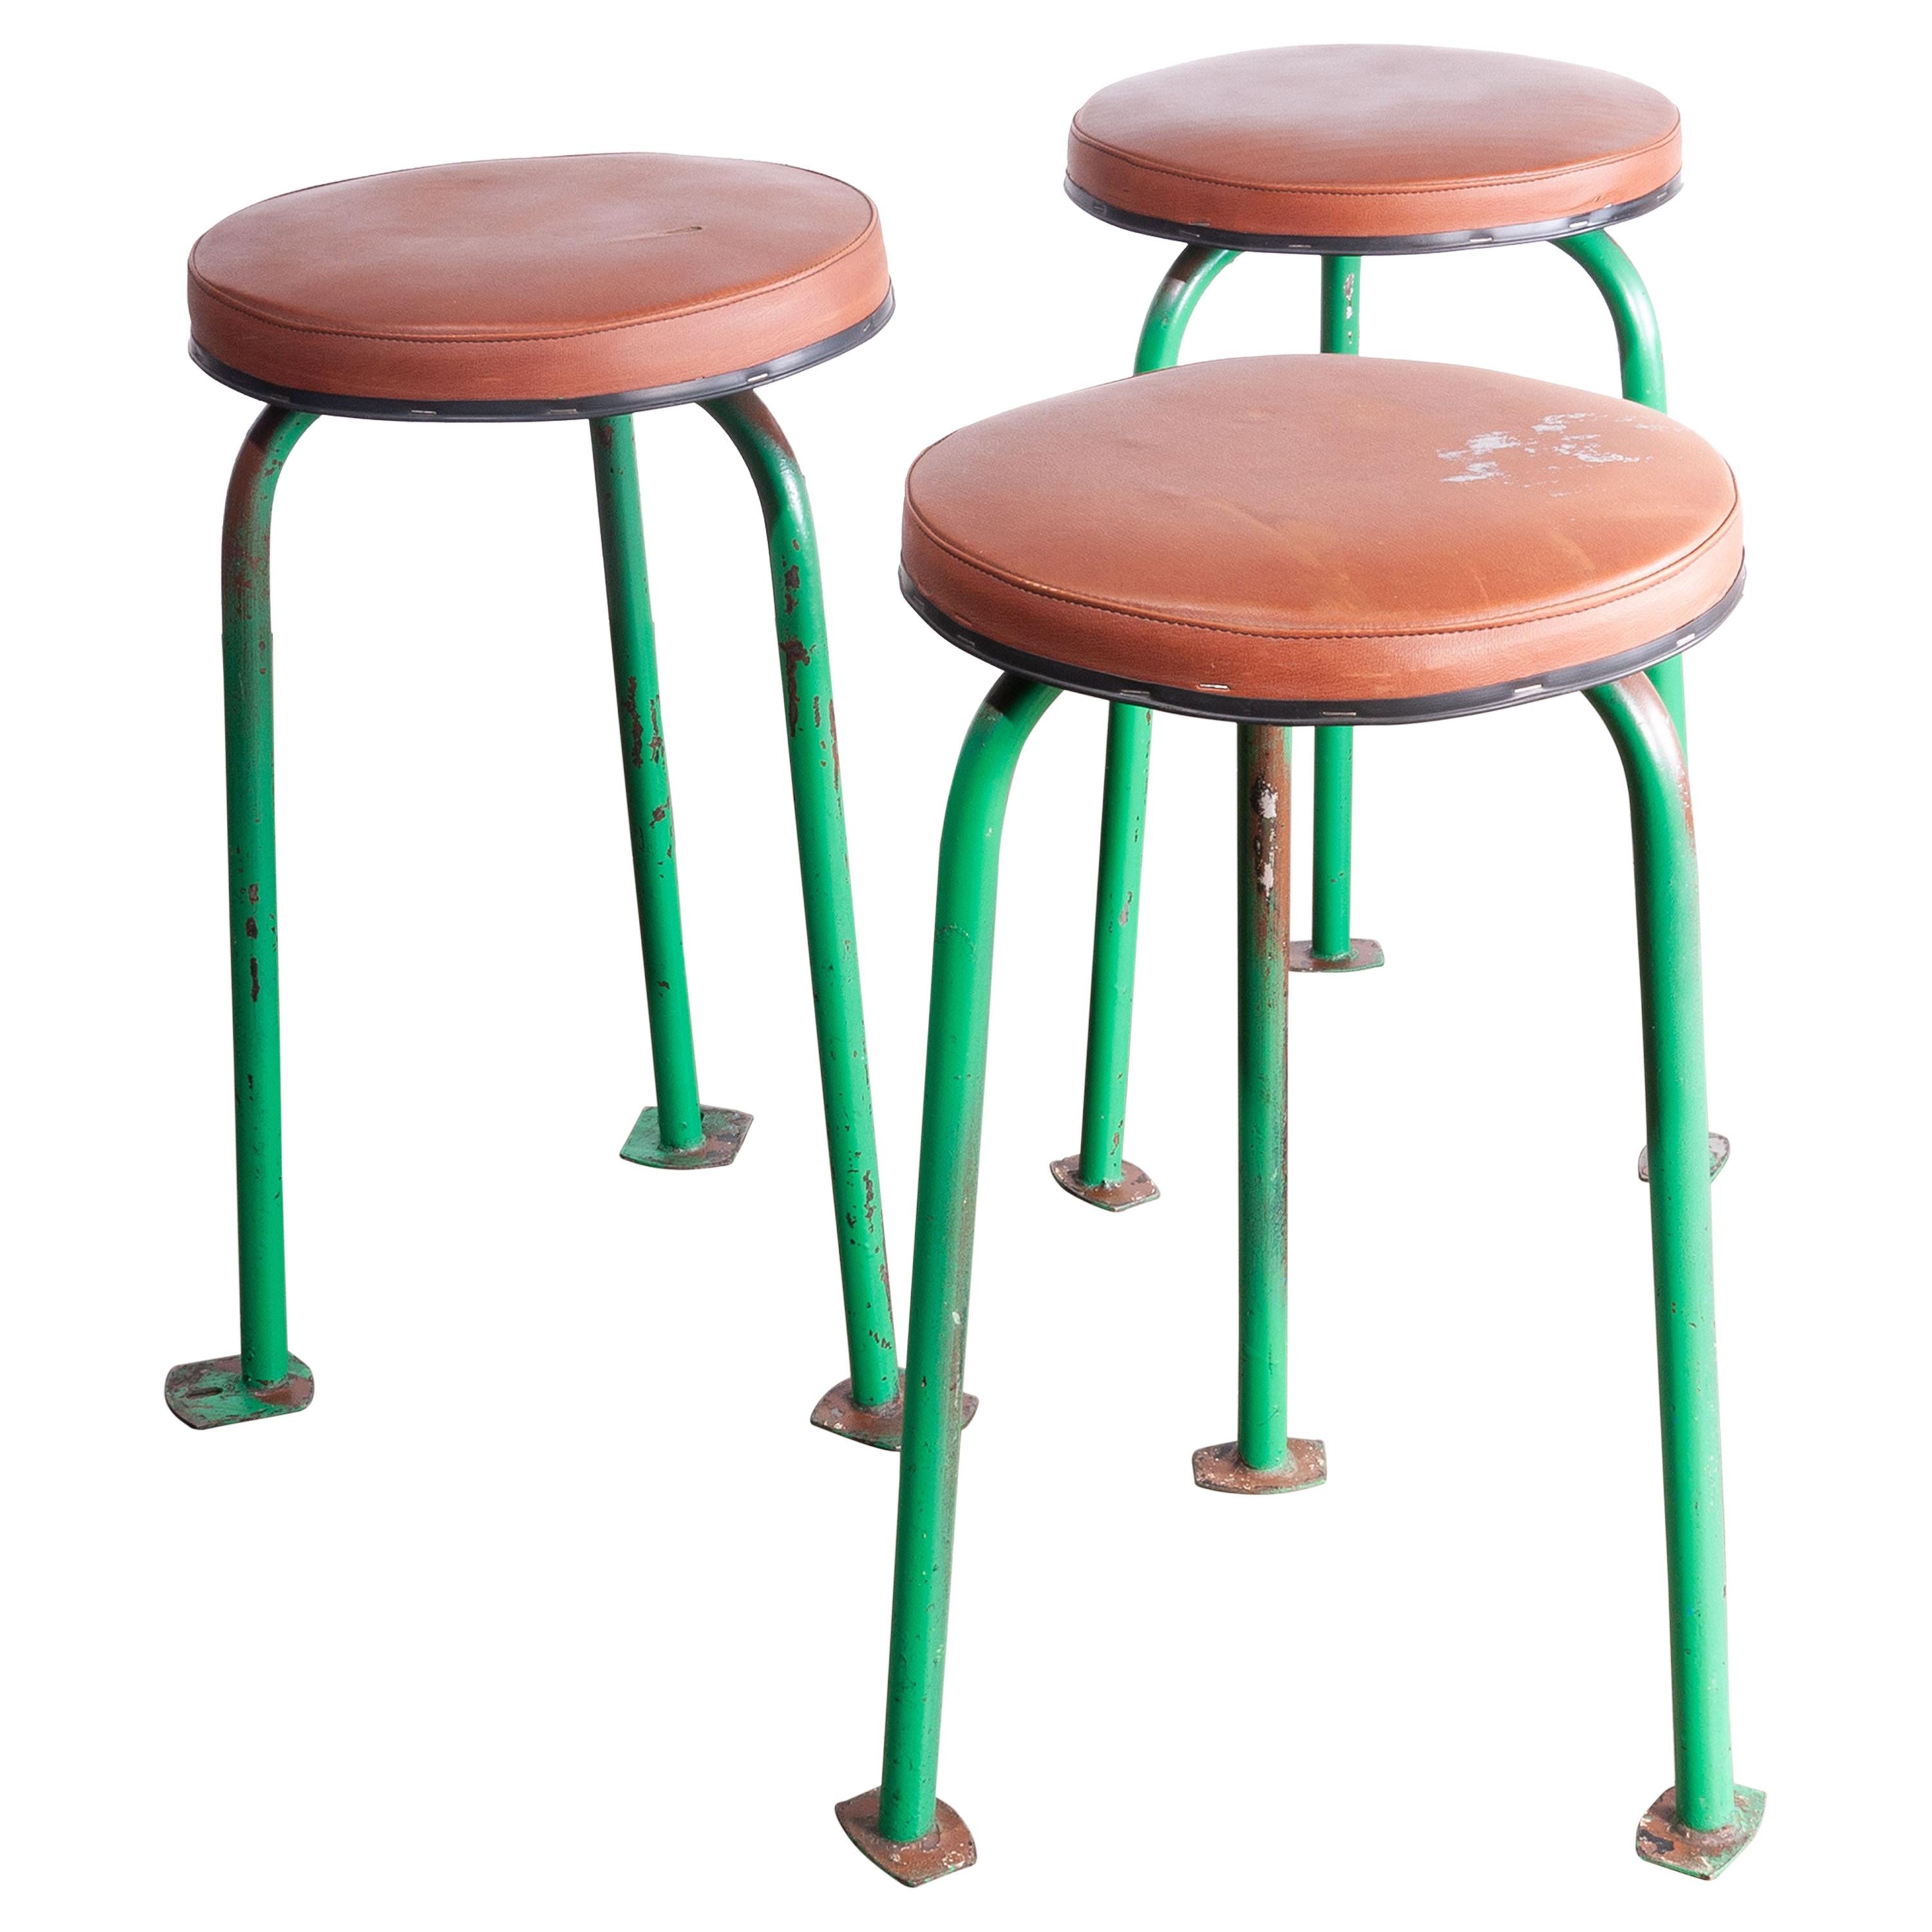 1960s Set of Three Green 1960s Russian Industrial Stools